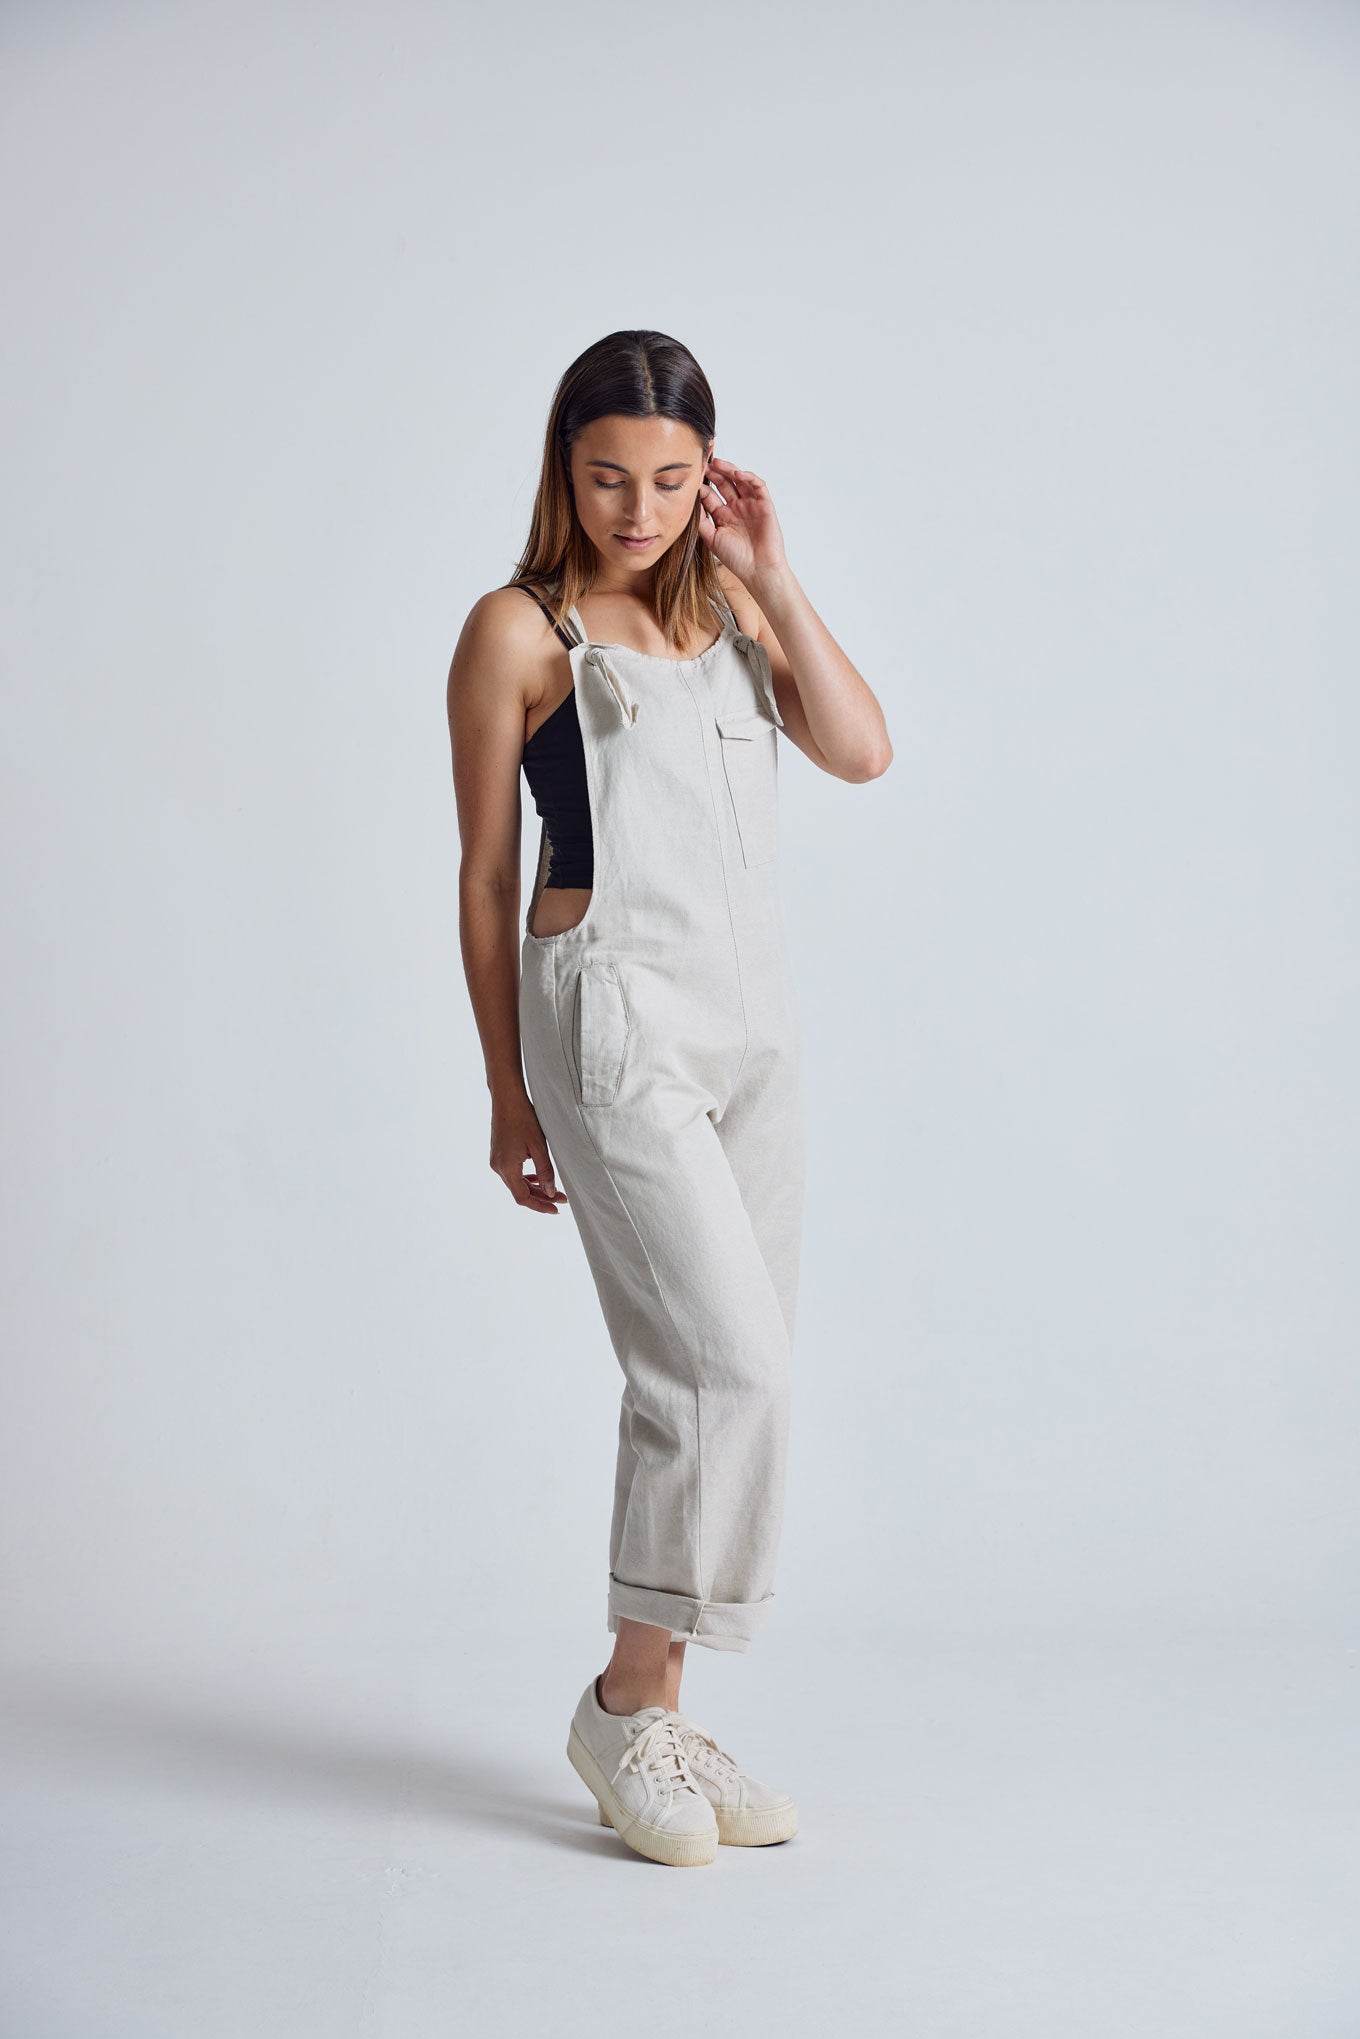 MARY-LOU Natural - GOTS Organic Cotton Dungarees by Flax & Loom, SIZE 3 / UK 12 / EUR 40